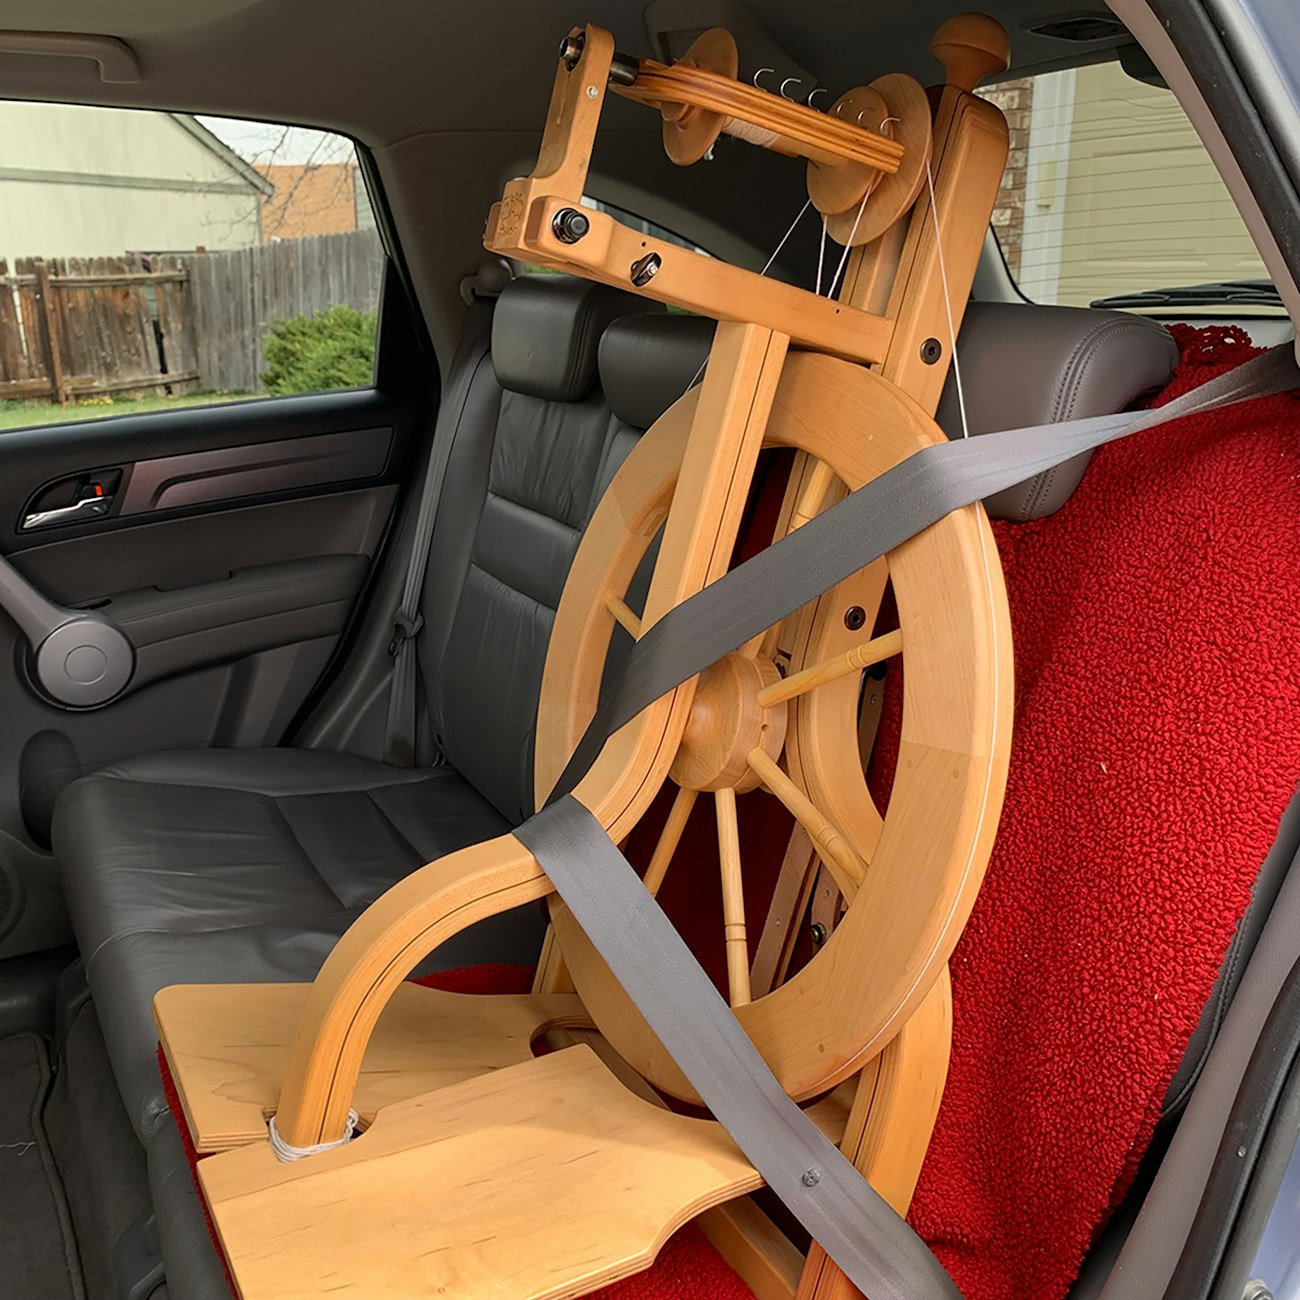 Matchless spinning wheel in car